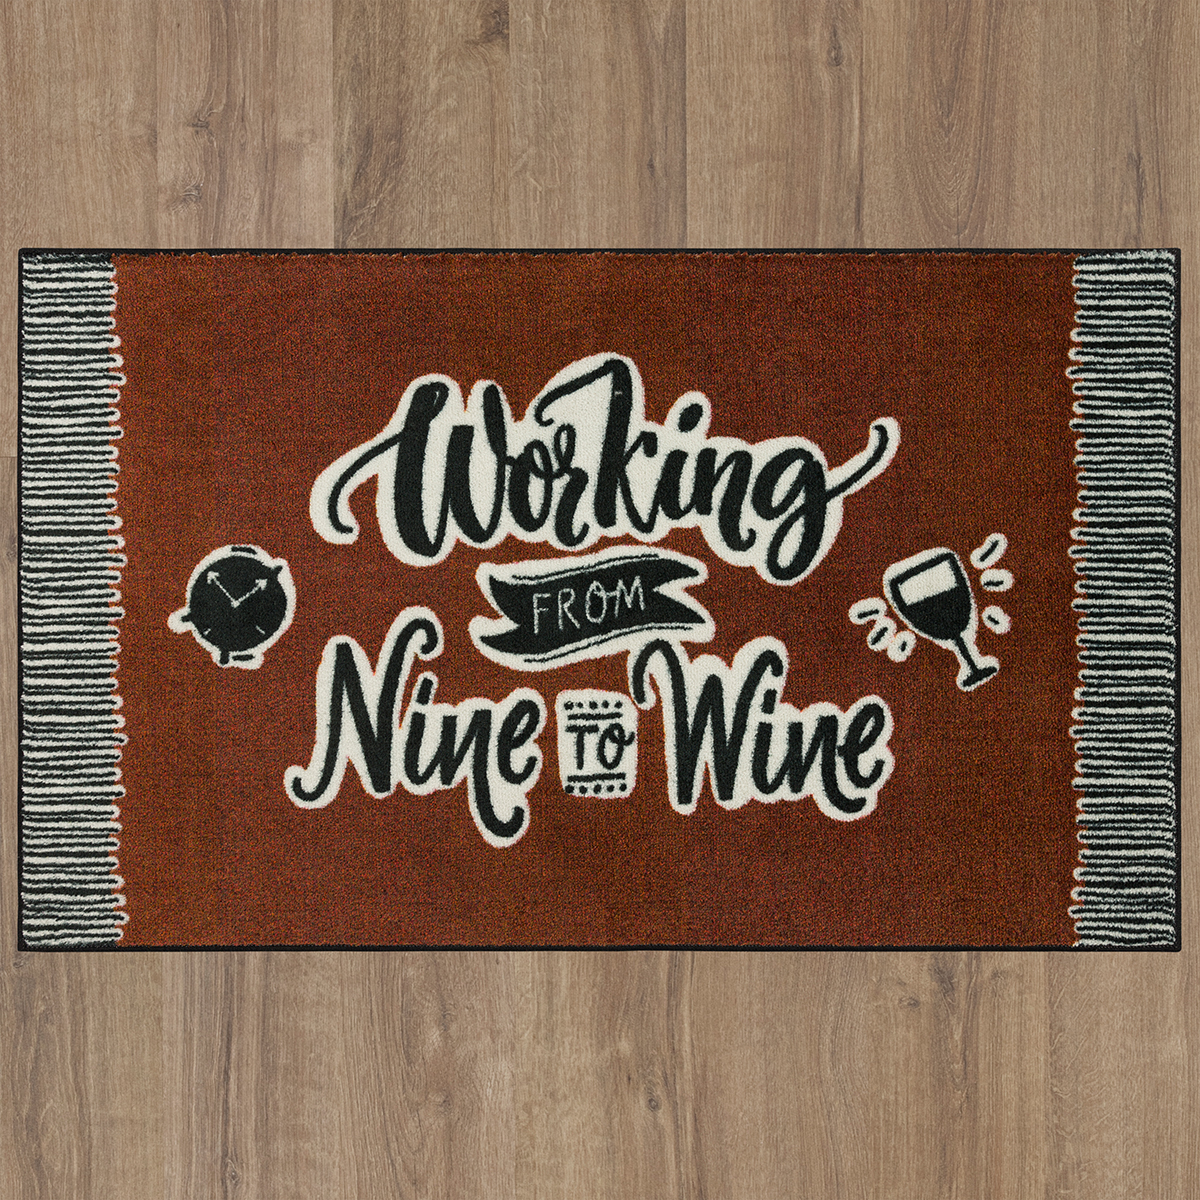 Mohawk Nine To Wine Red Accent Rug